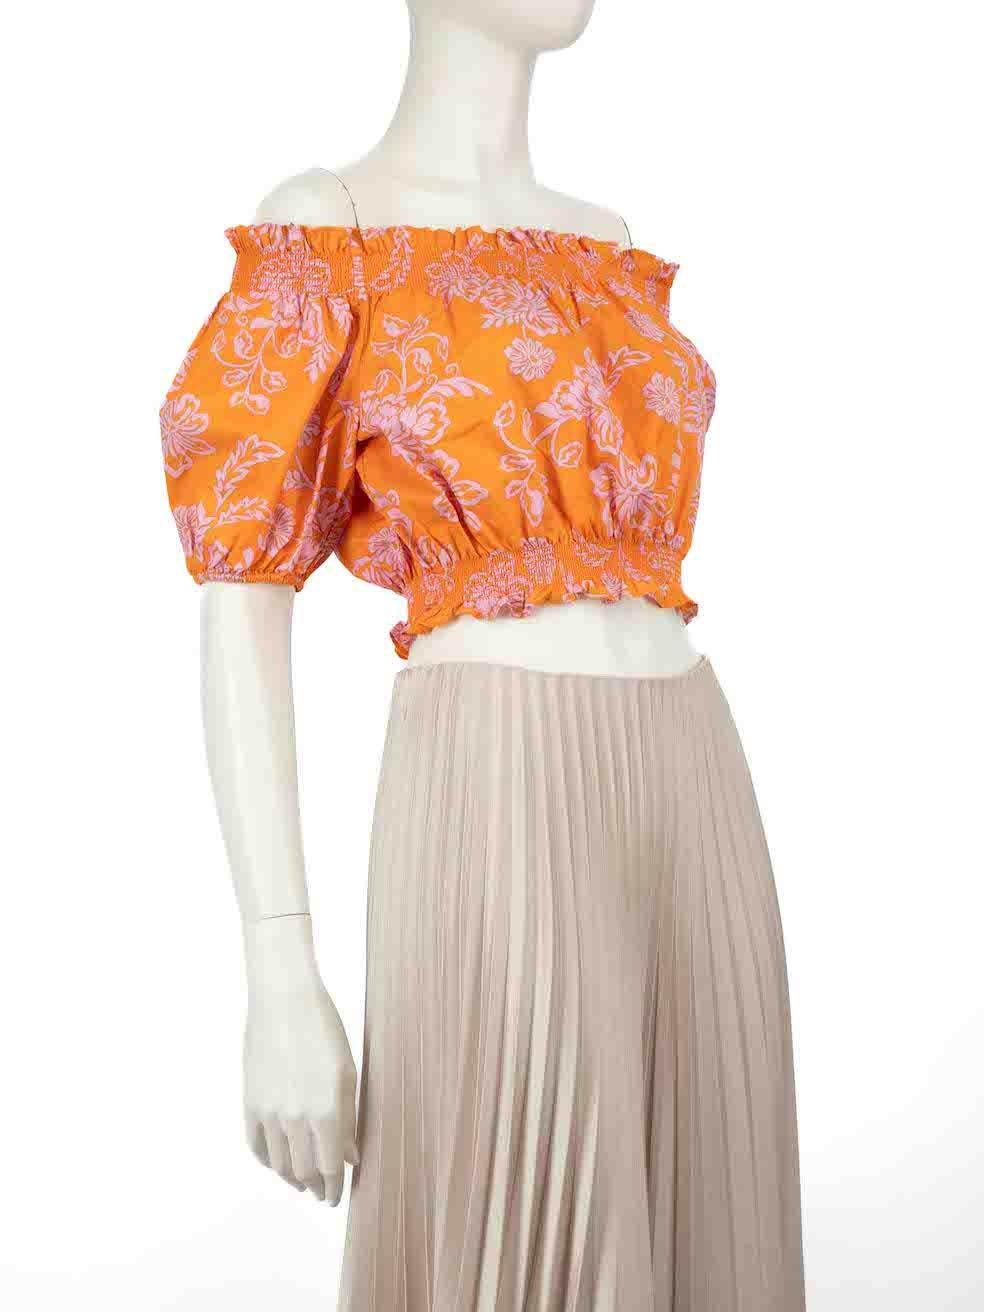 CONDITION is Very good. Hardly any visible wear to the top is evident on this used Xirena designer resale item.
 
 
 
 Details
 
 
 Orange
 
 Cotton
 
 Top
 
 Floral print
 
 Cropped fit
 
 Short puff sleeves
 
 Off the shoulder
 
 Elasticated